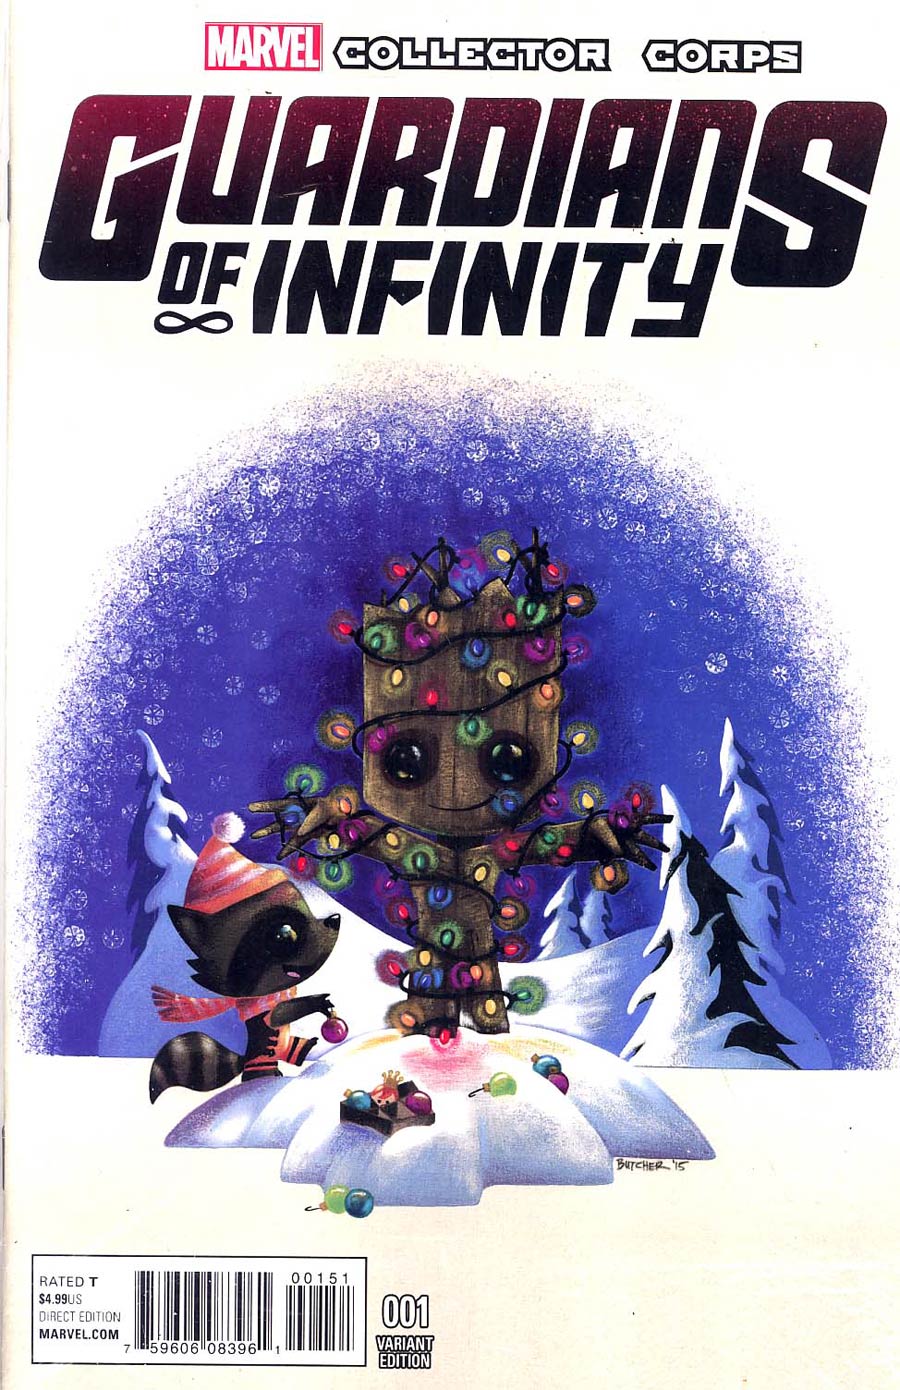 Guardians of Infinity #1 Collector Corps Exclusive